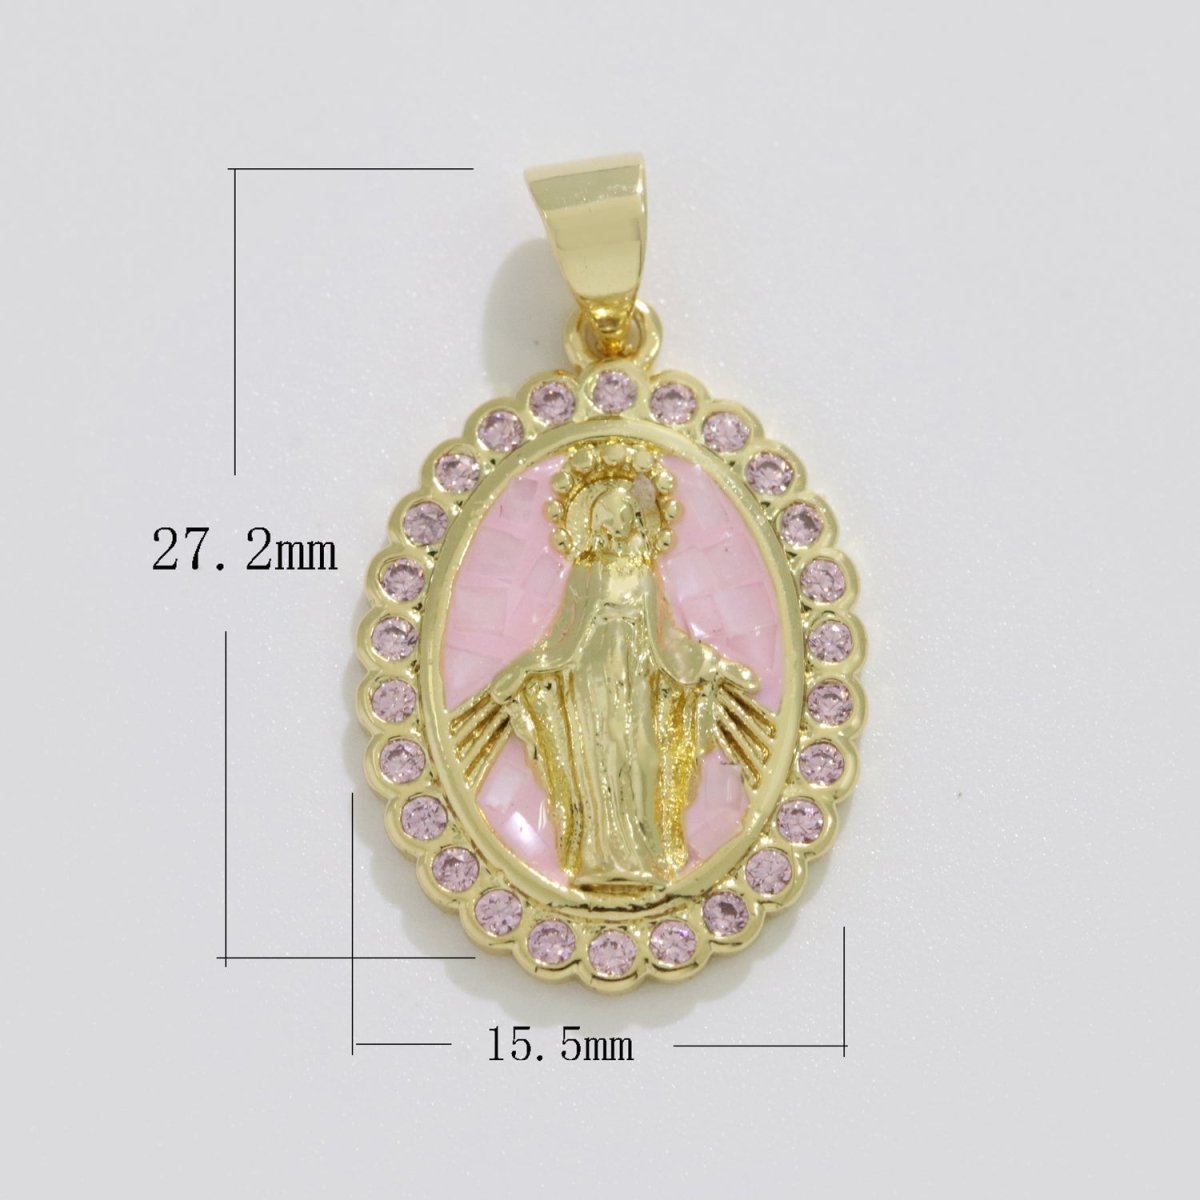 Pink Virgin Mary Charm for Necklace, Dainty Lady Guadalupe Pendant for Religious Jewelry Making Supply in Gold Filled I-778 B-882 - DLUXCA